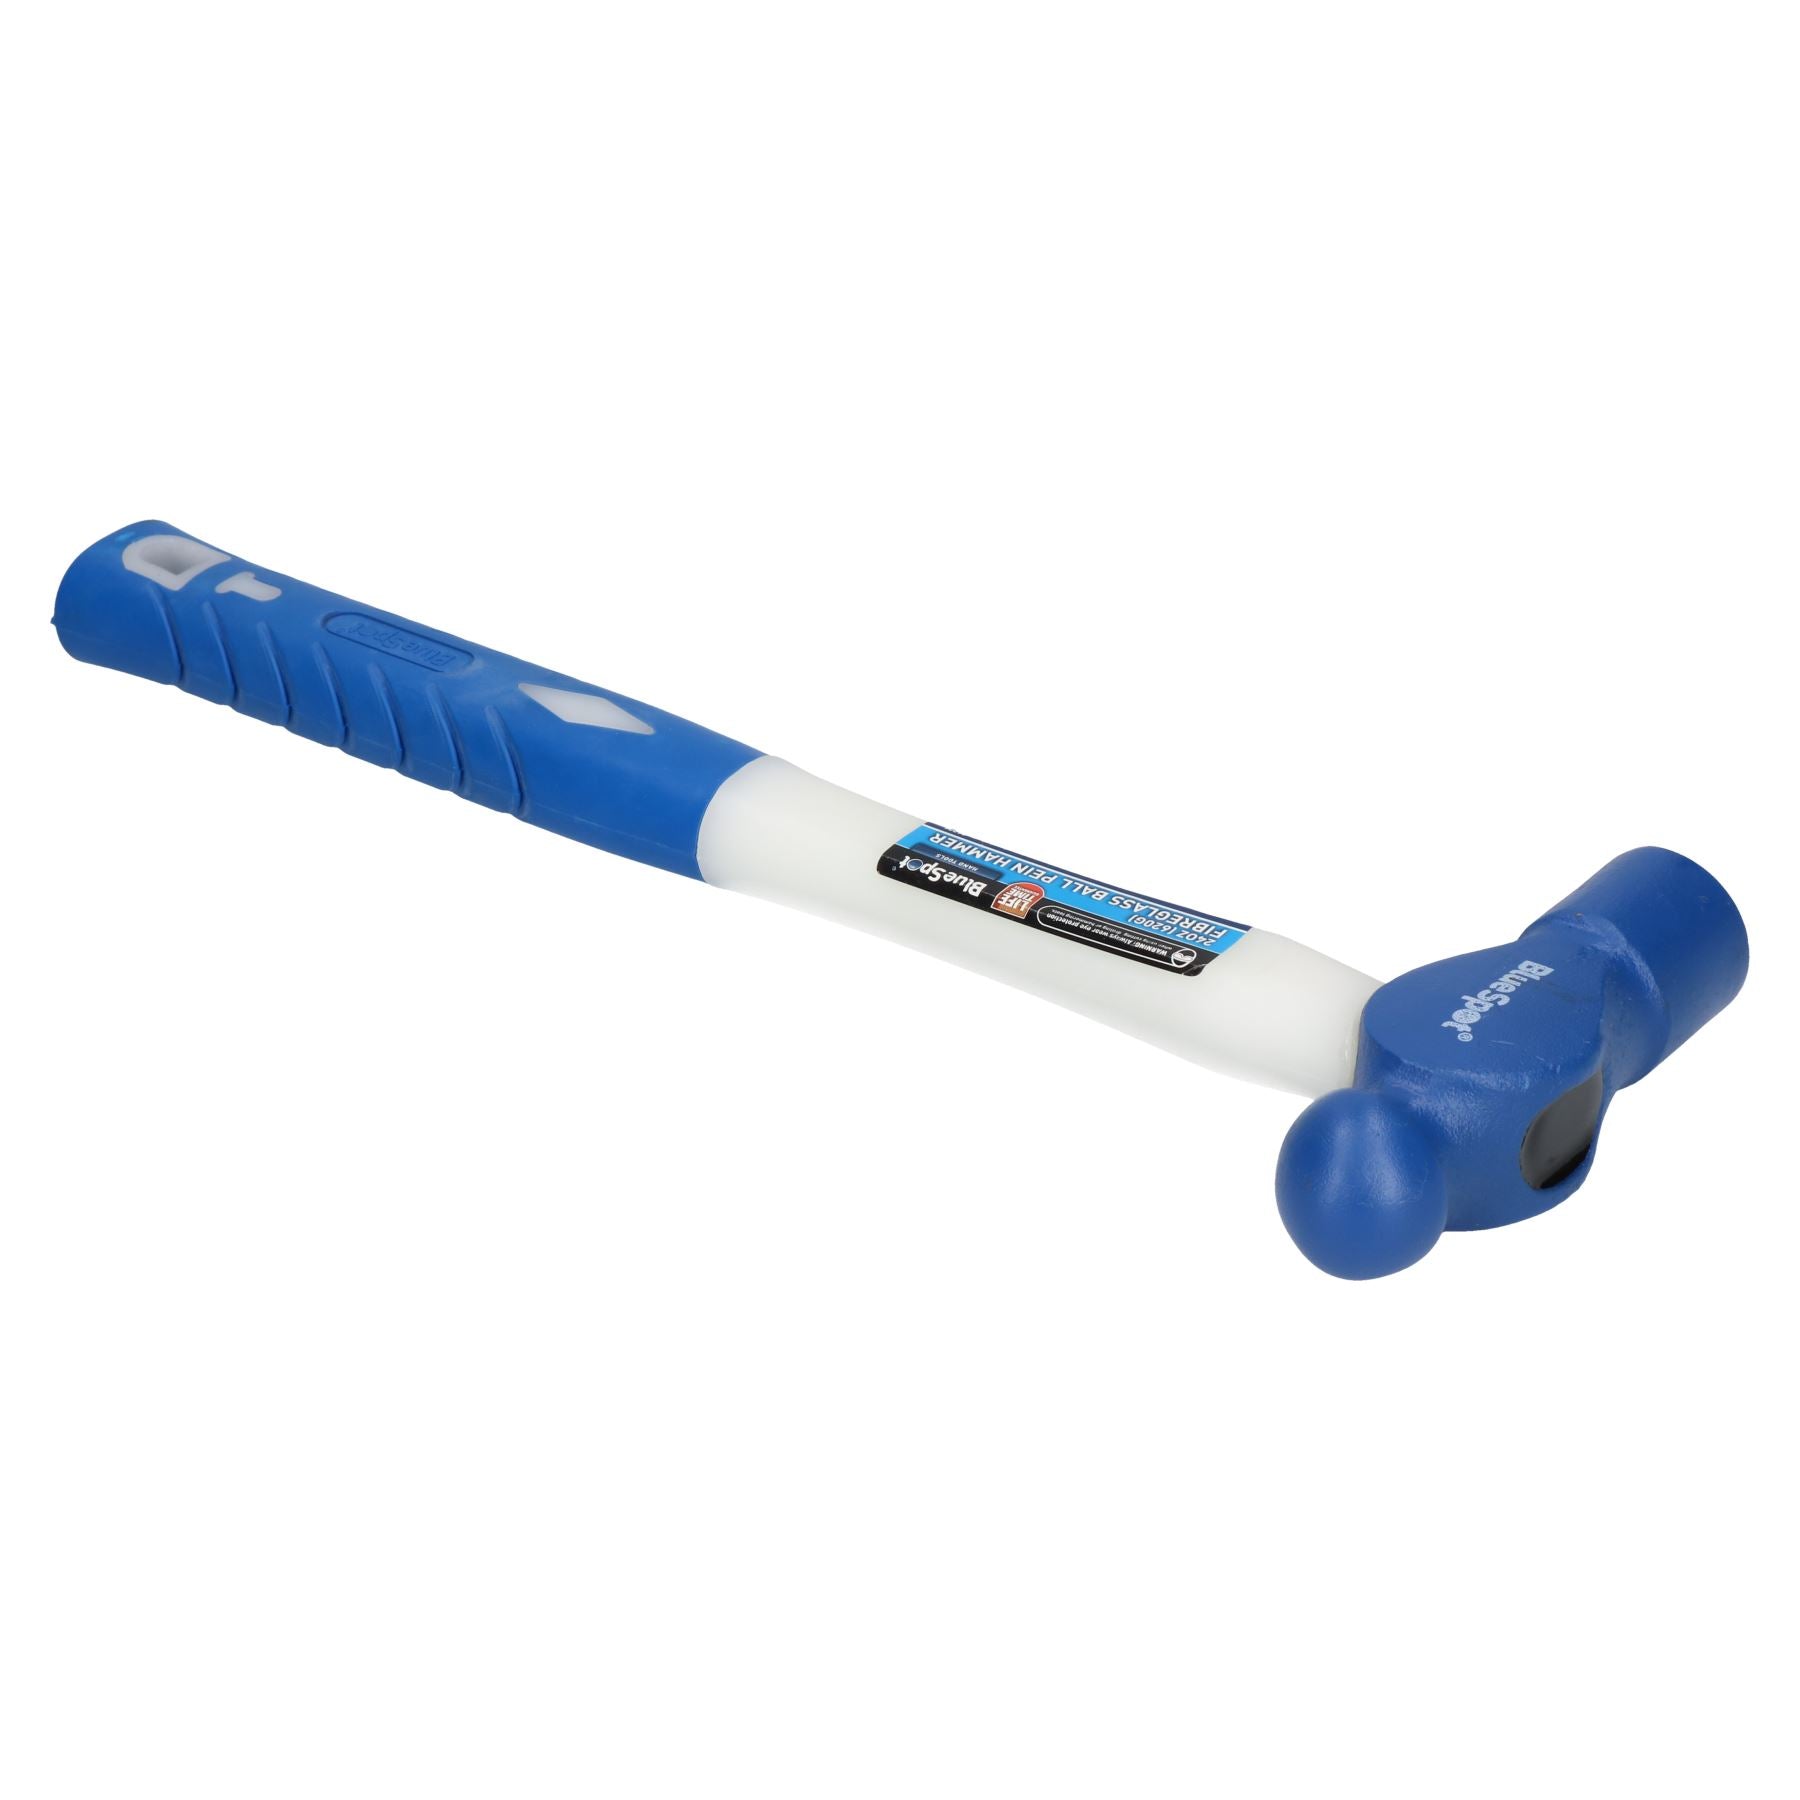 24oz (620g) Ball Pein Hammer with Fibreglass Shaft and TPR Rubberised Handle